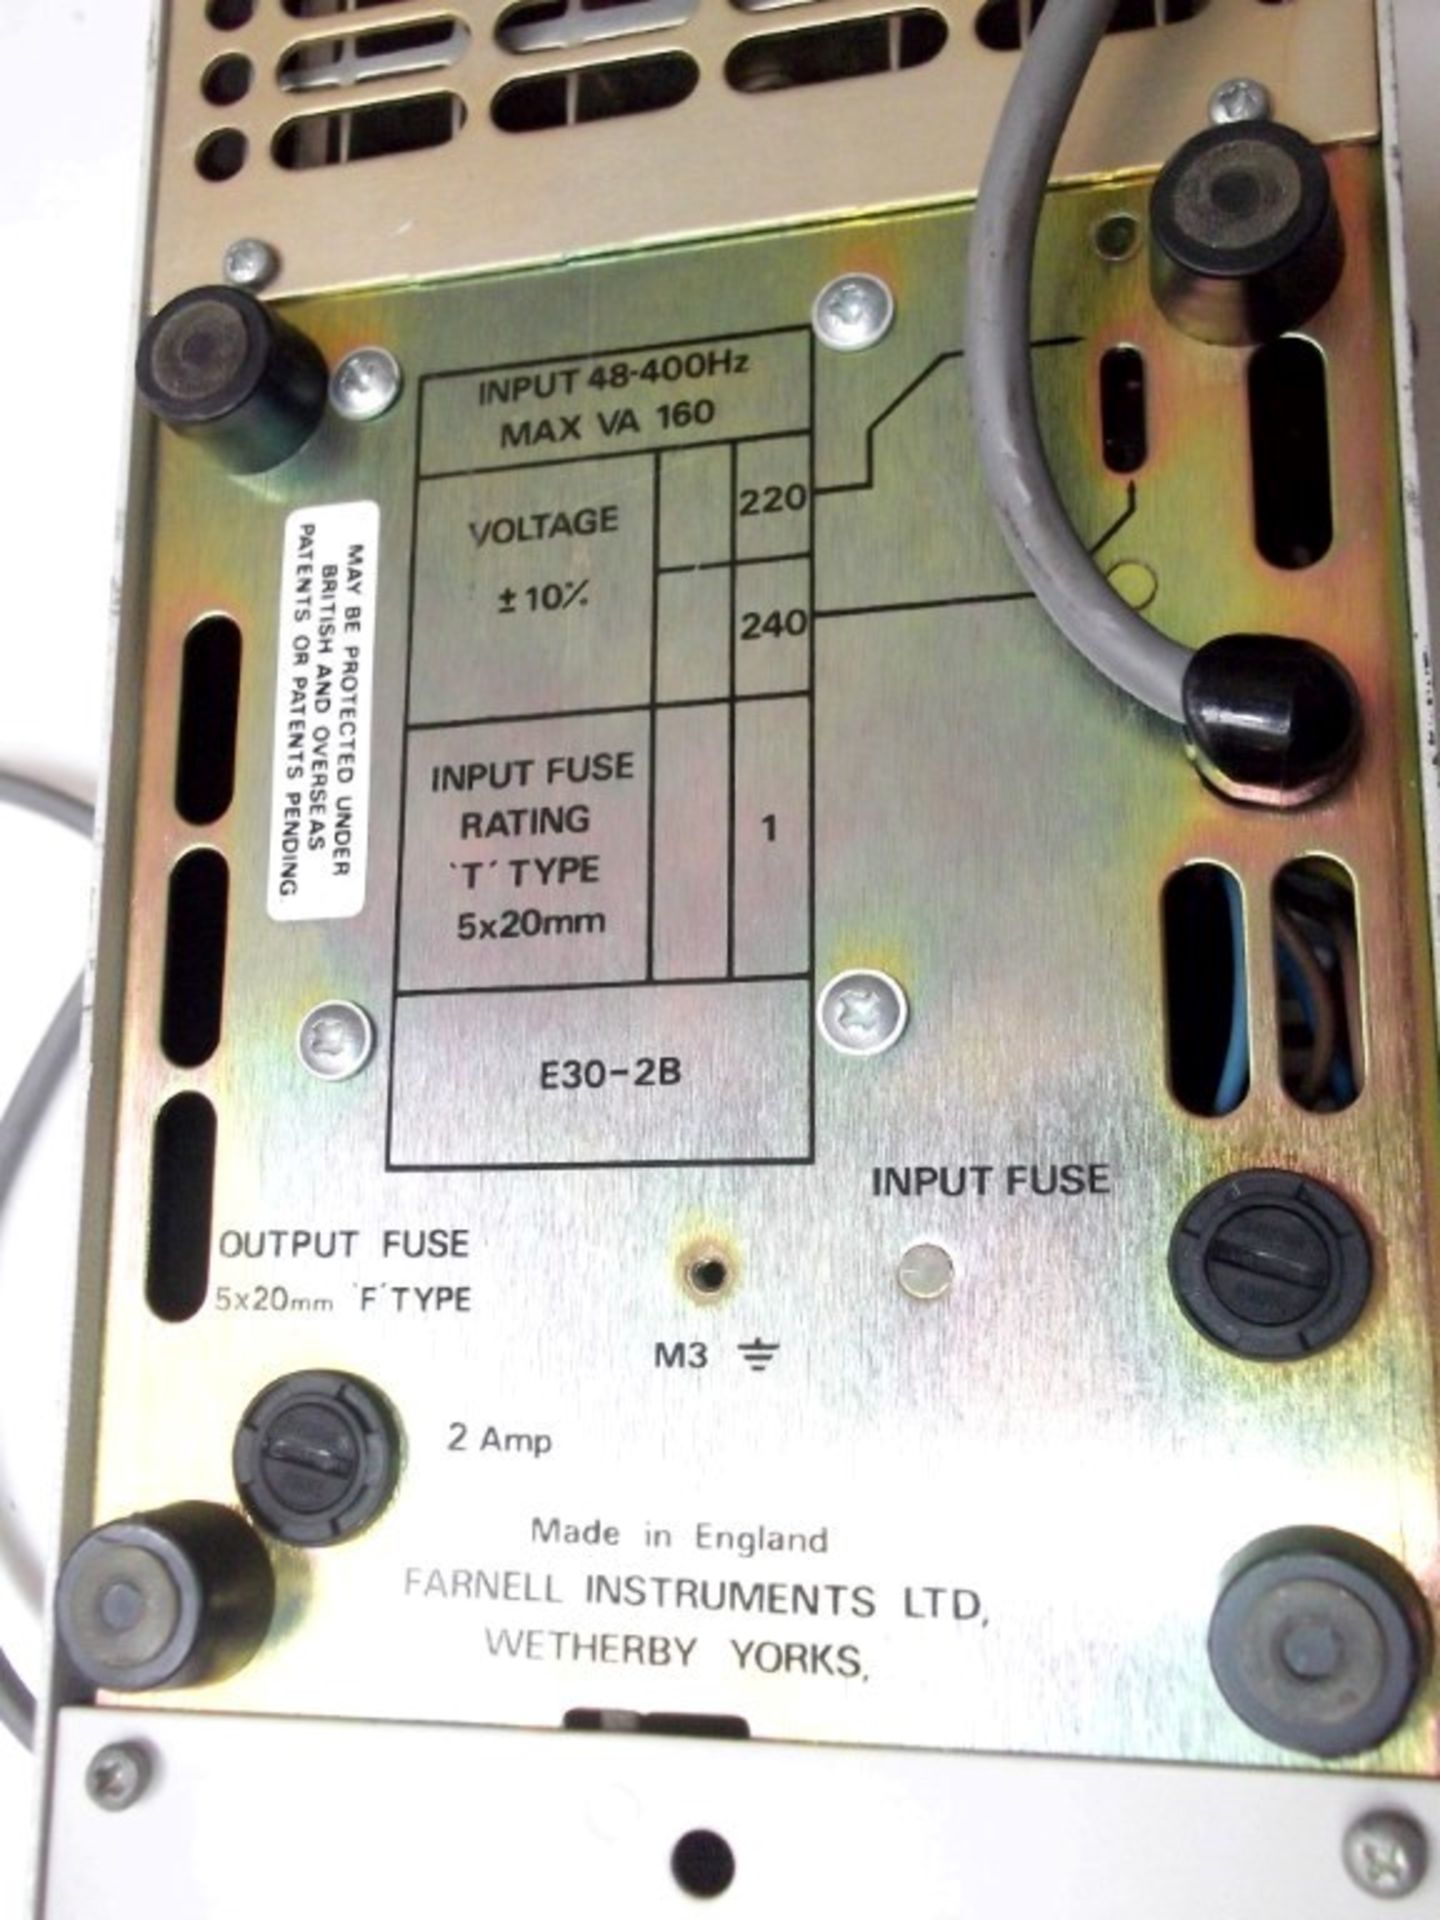 1 x Farnell power supply E30/2 - REF: MIT55 - Used, Item Powers Up, No Further Tests Made - See - Image 4 of 4